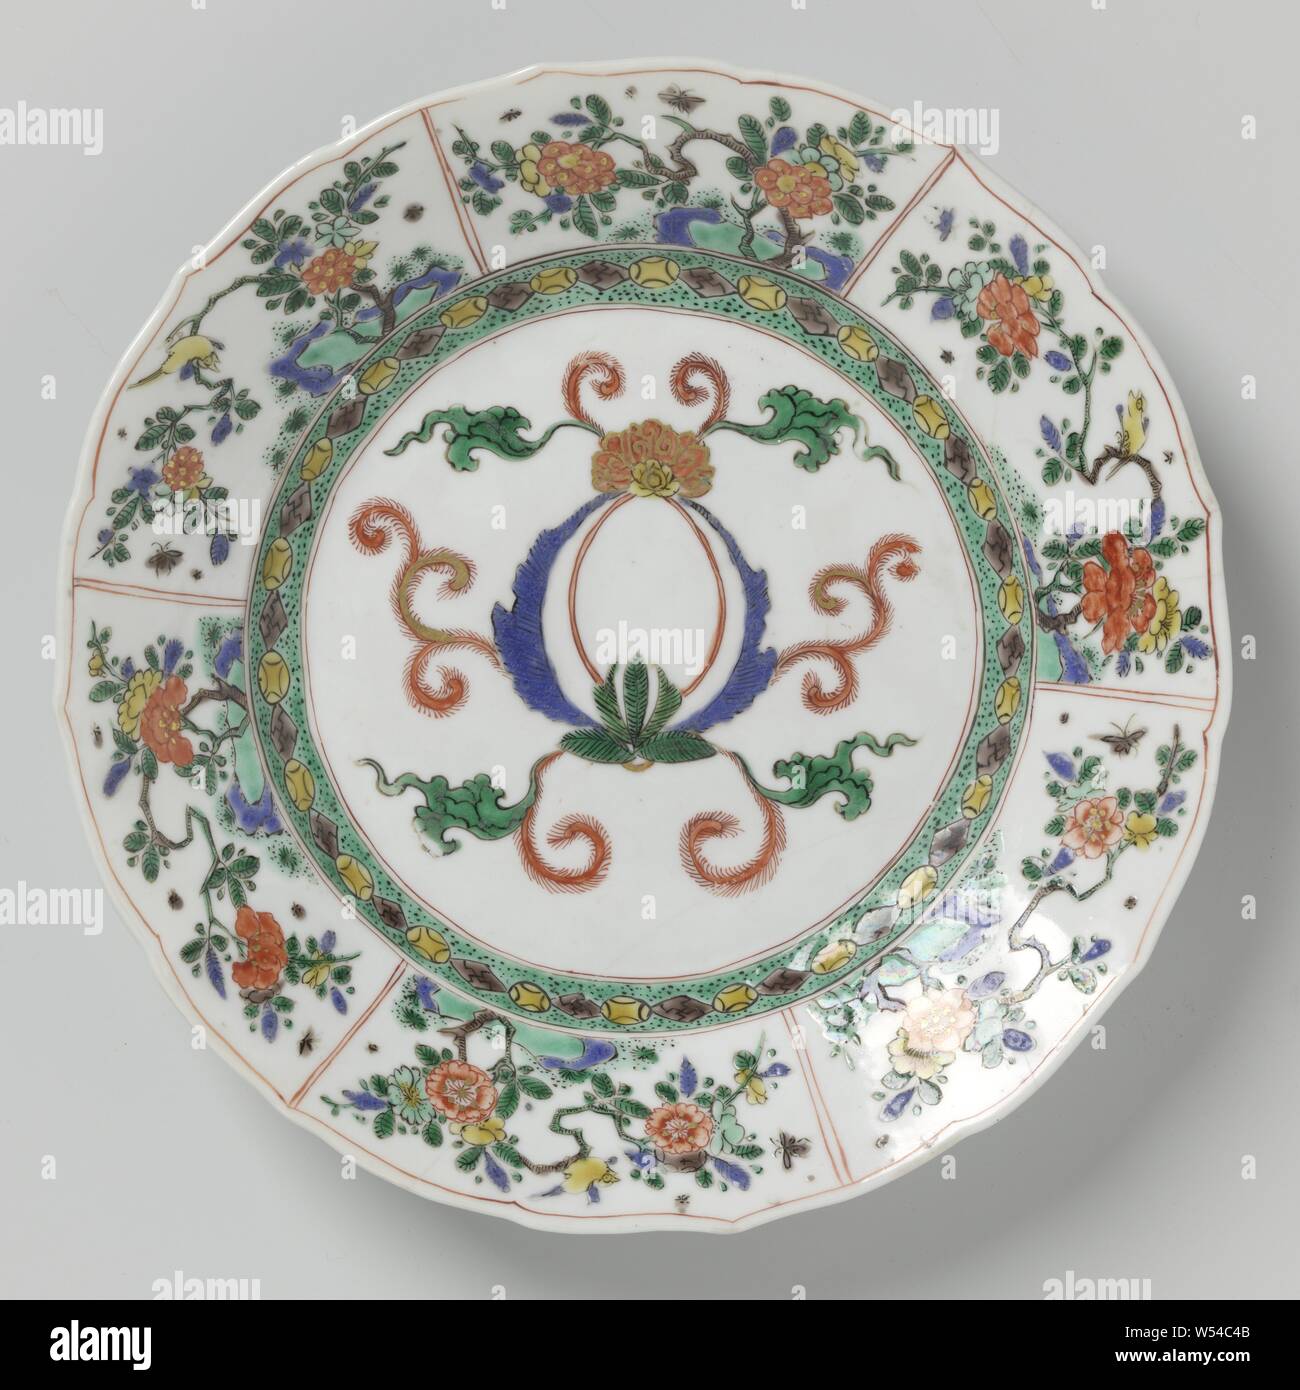 Plate with foliate scroll decoration and flowering plants, Plate with a broad, lobed porcelain border, painted in underglaze blue and on the glaze blue, red, green, yellow, eggplant, black and gold. On the shelf an empty cartouche decorated with leaf vines, the wall with a geometric motif against a green speckled ground, the border with a box decoration filled with flowering plants, birds and insects, the back with three flower sprays. Marked on the bottom with an incense burner in a double circle. Plate has been broken. Famille Verte., anonymous, China, c. 1700 - c. 1724, Qing-dynasty (1644 Stock Photo